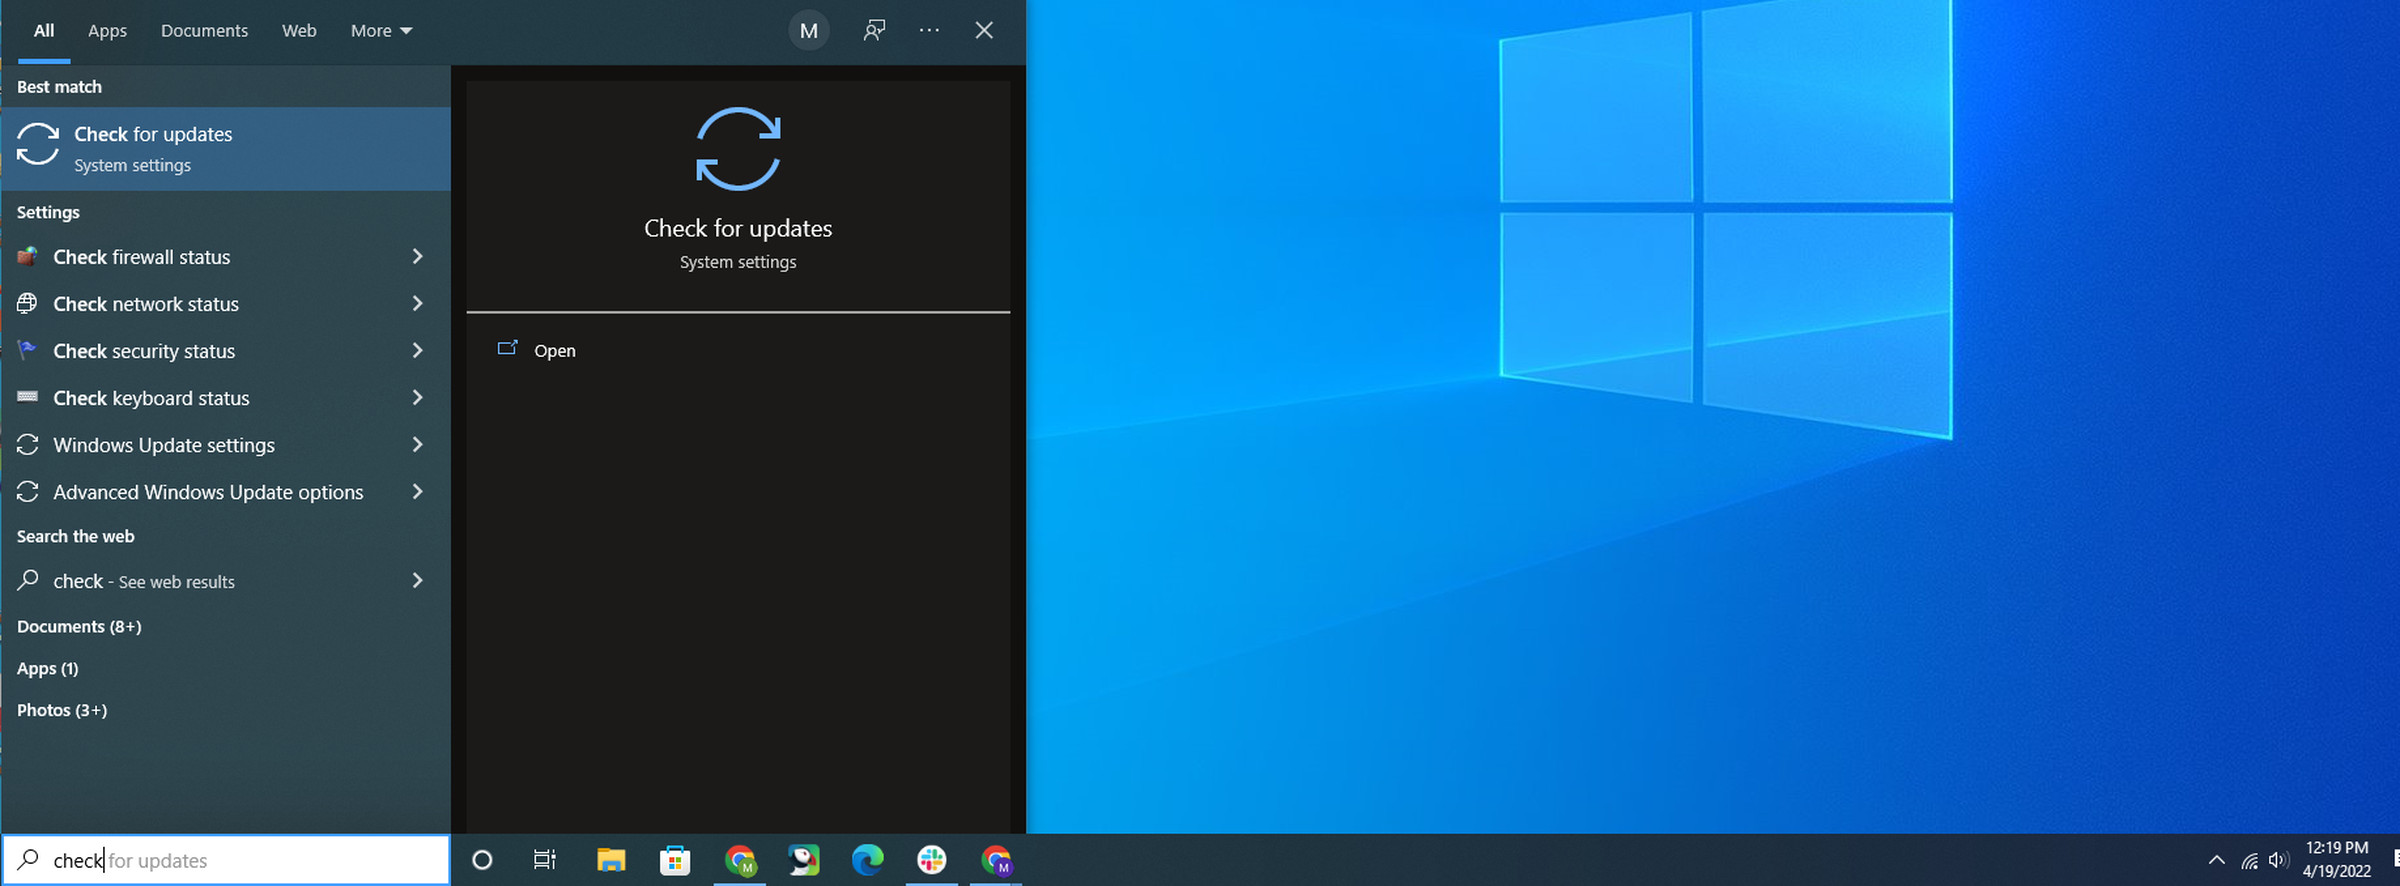 A screenshot of a Windows 10 desktop. “Check” is written in the search bar and “Check for Updates” is highlighted in the start menu.